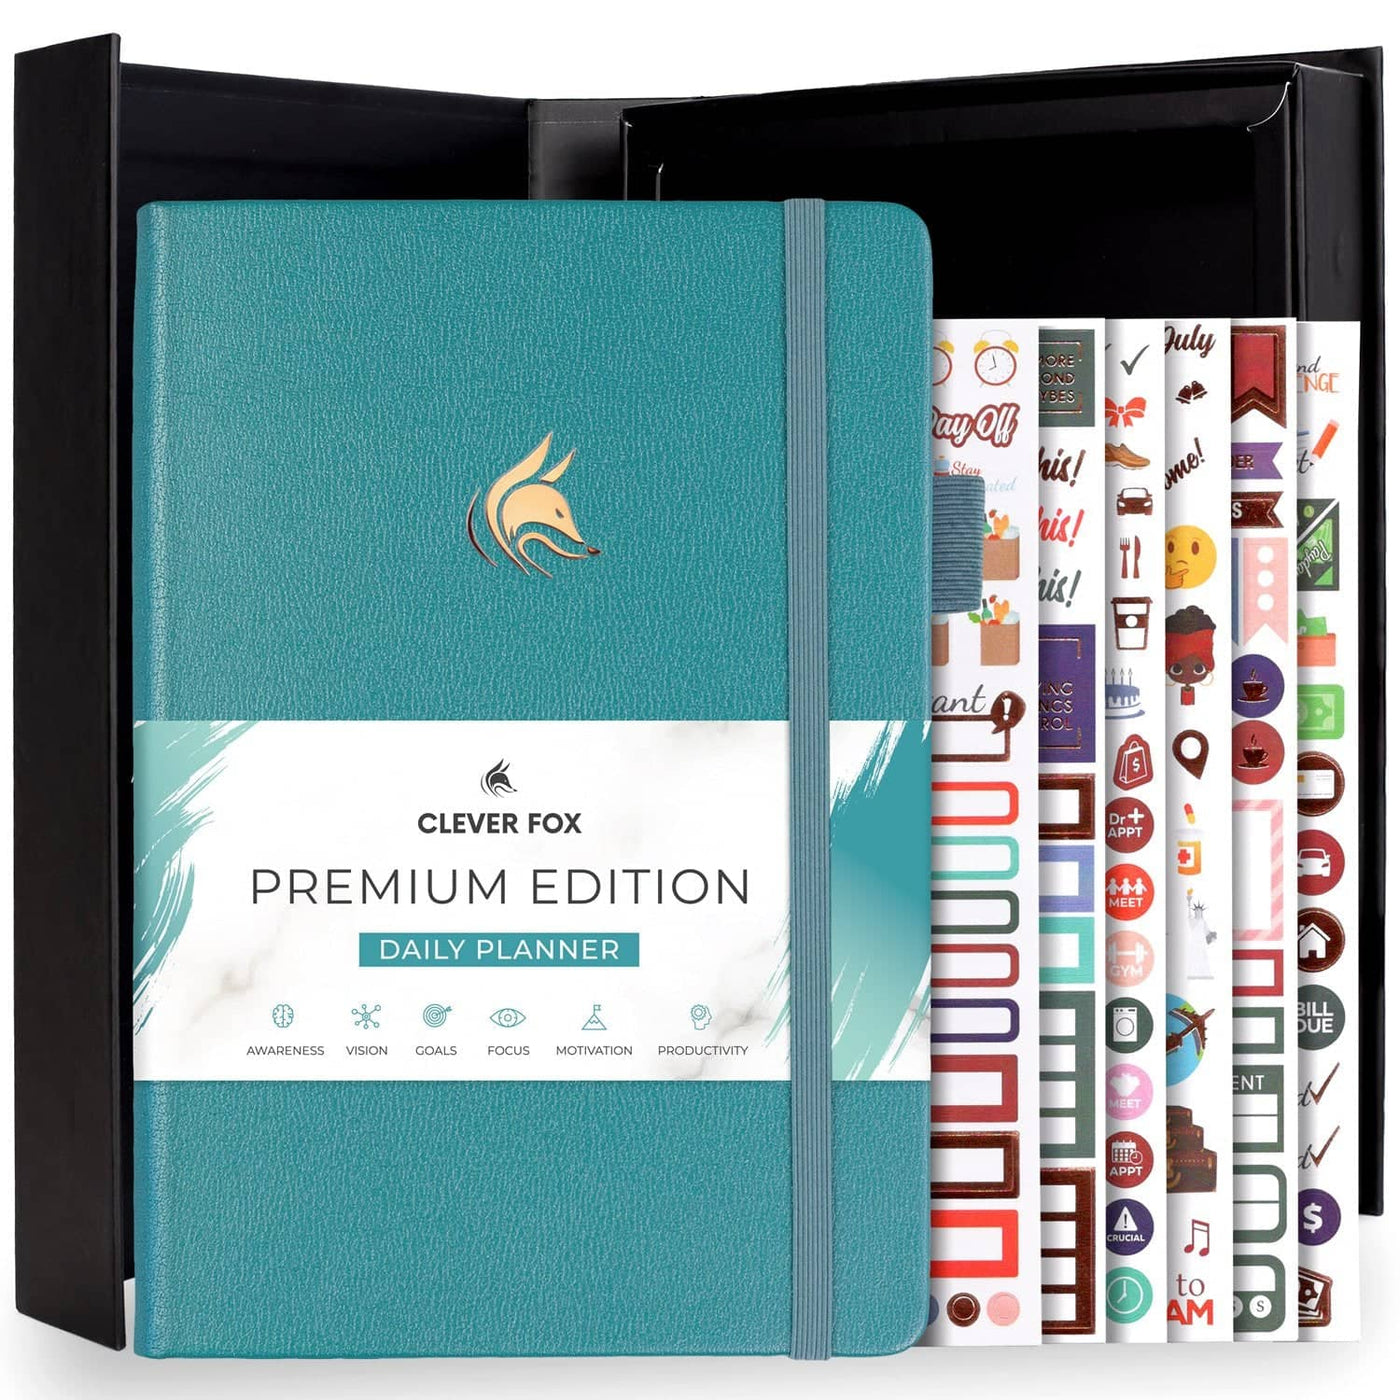 Undated Premium Edition Daily Planner - Take Smalls Steps Each Day & A – Clever  Fox®